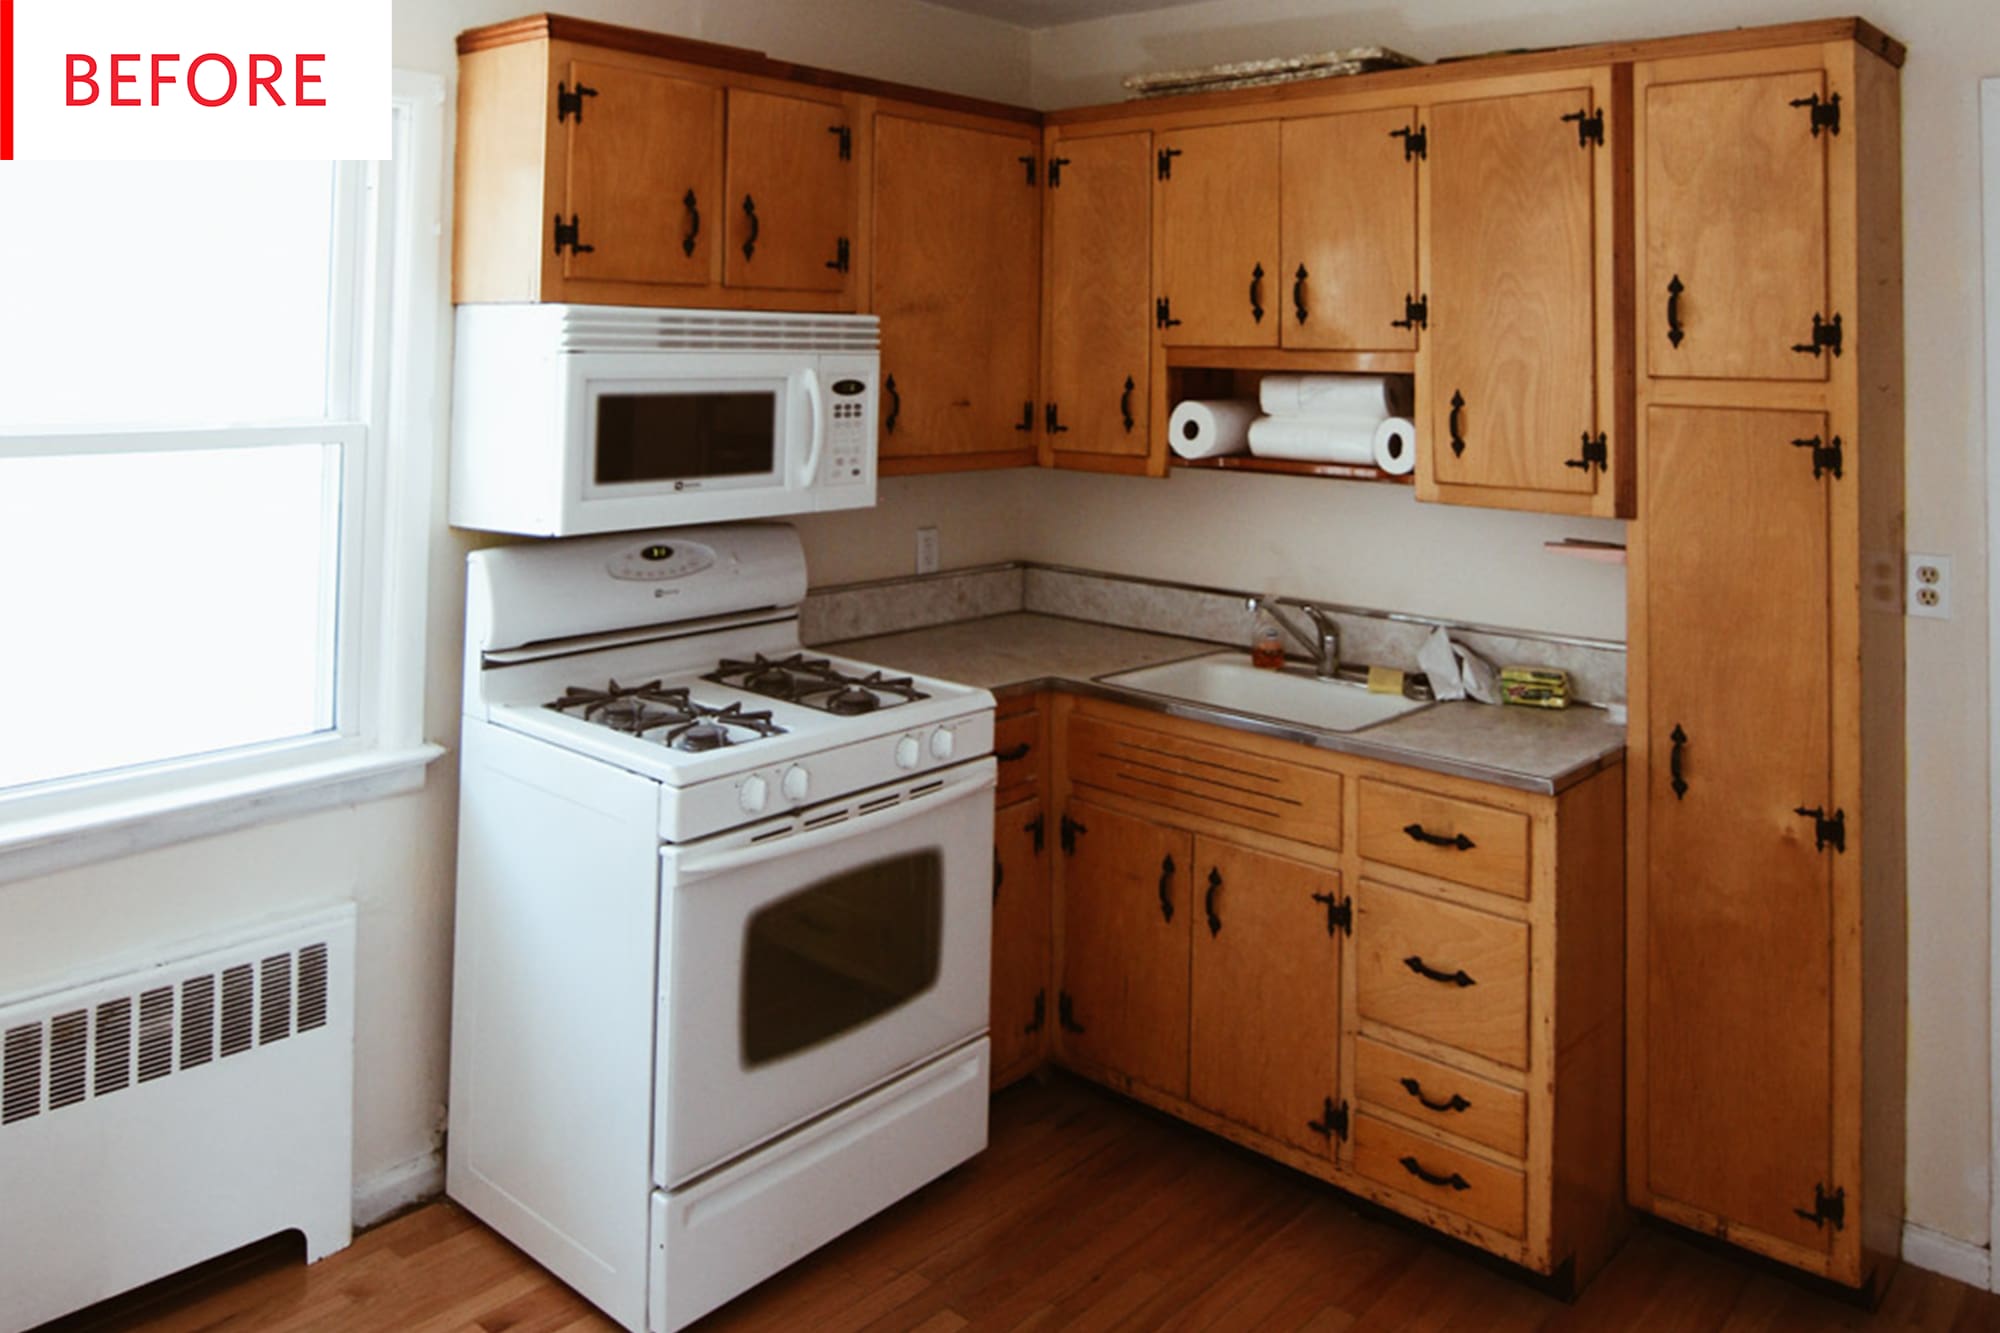 Painting Kitchen Cabinets Budget Remodel Before After Apartment Therapy